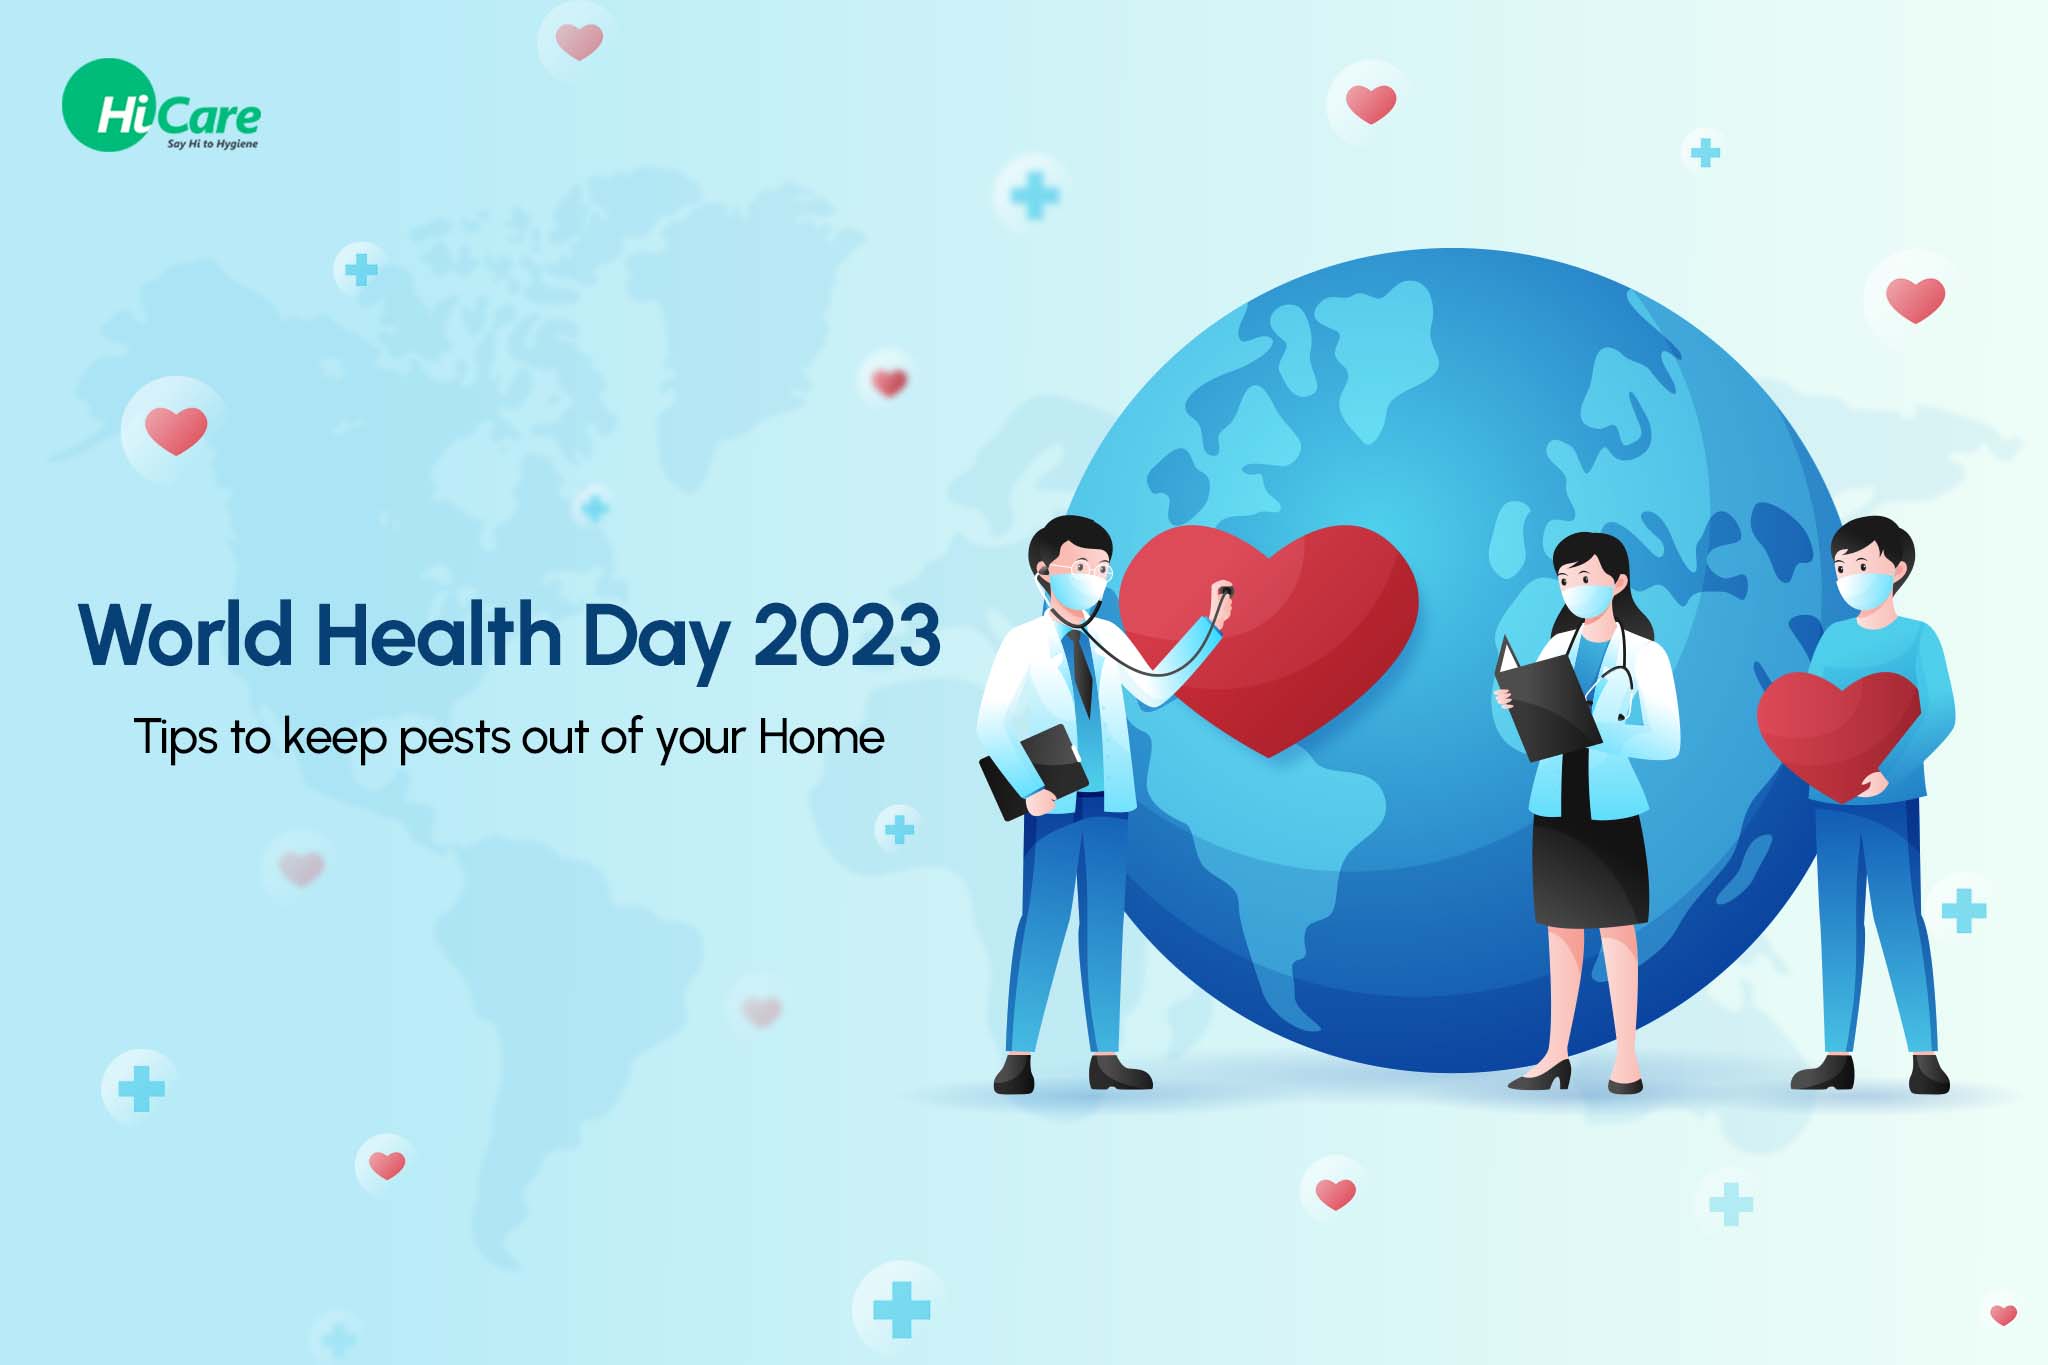 World Health Day 2023: 10 Helpful Tips to Keep Pests Out of Your Home